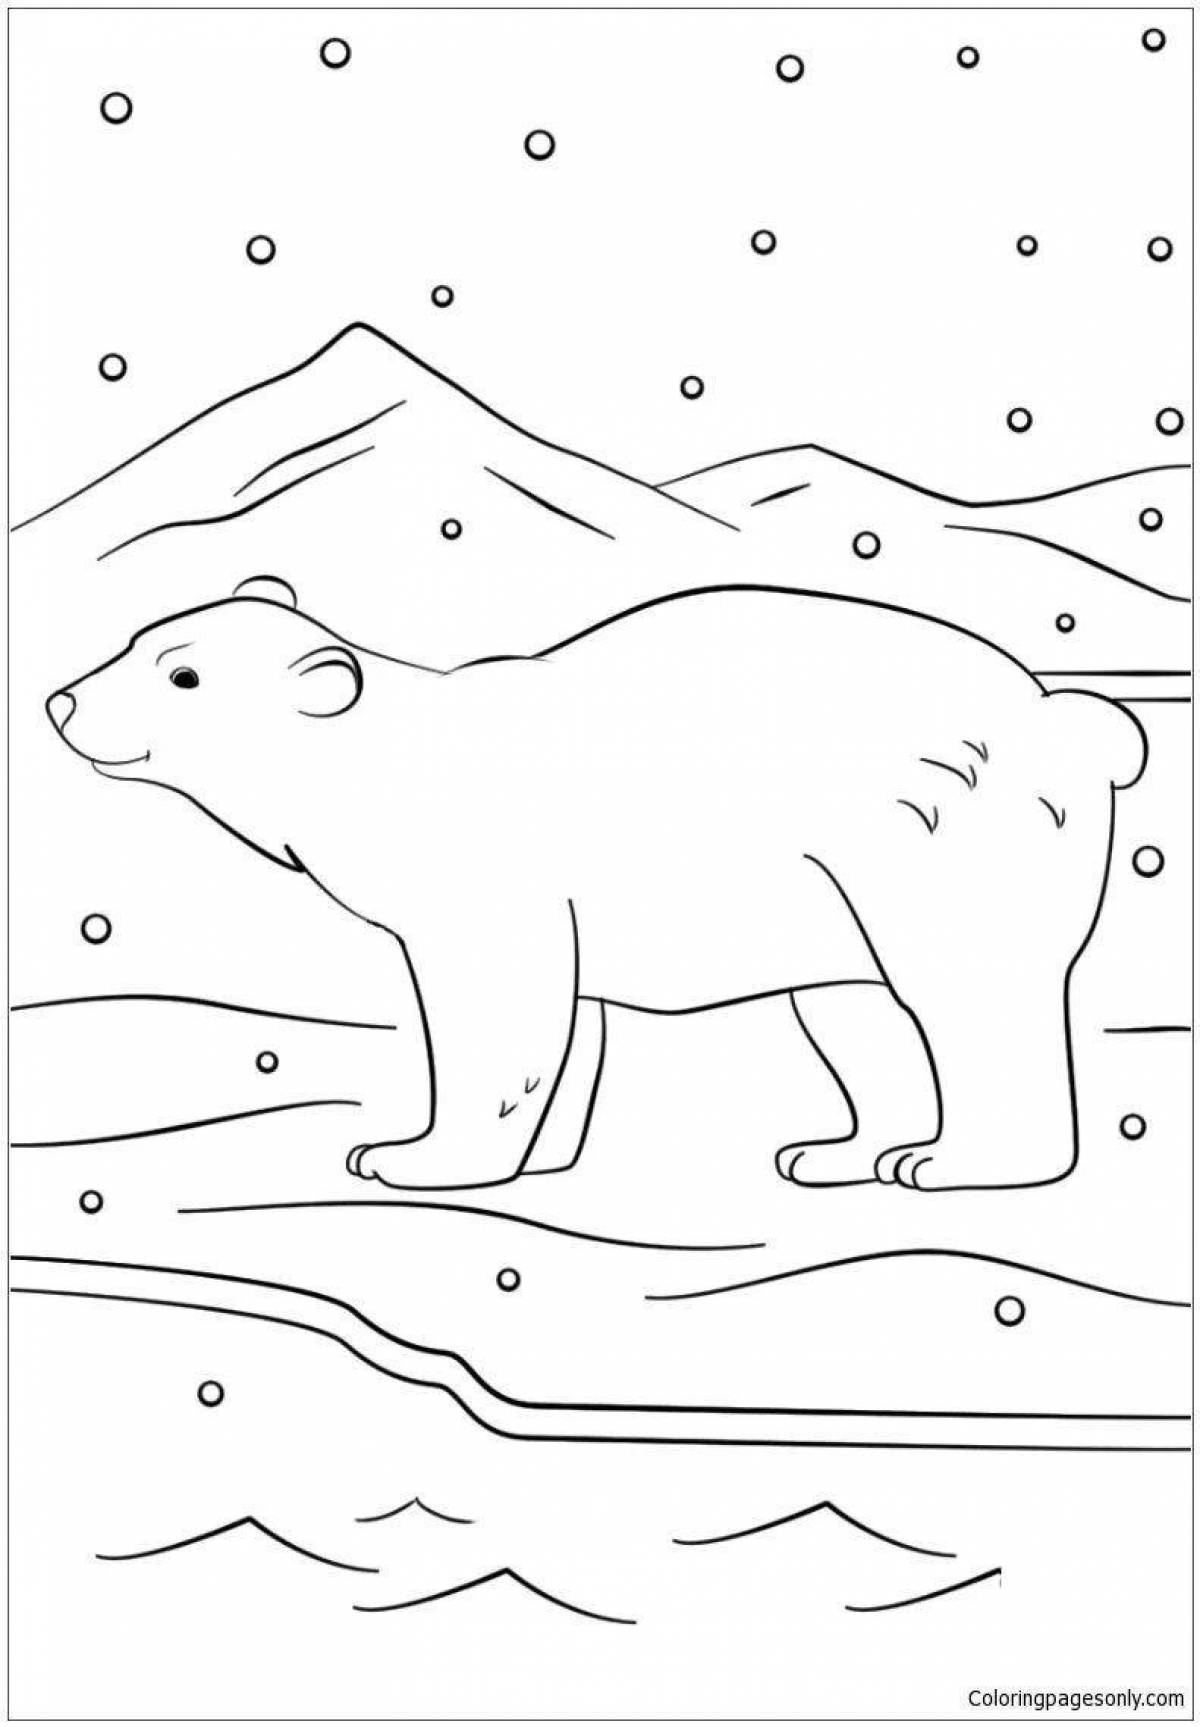 Coloring book shiny bear in the north